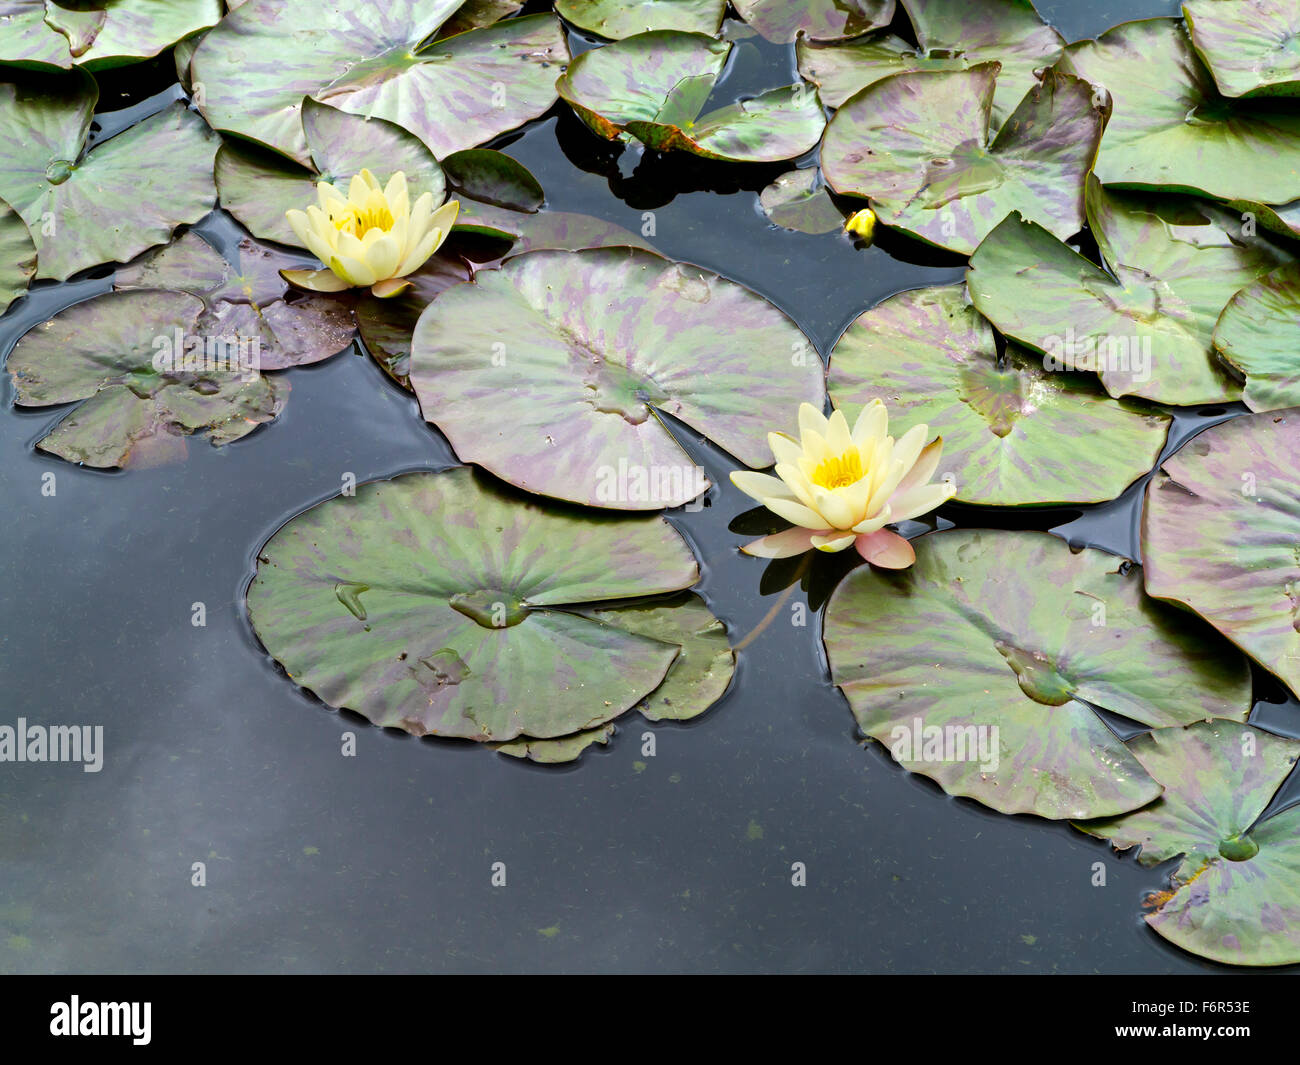 Yellow water lily flowers Nymphaeaceae and circular leaves on a lake in summer Stock Photo